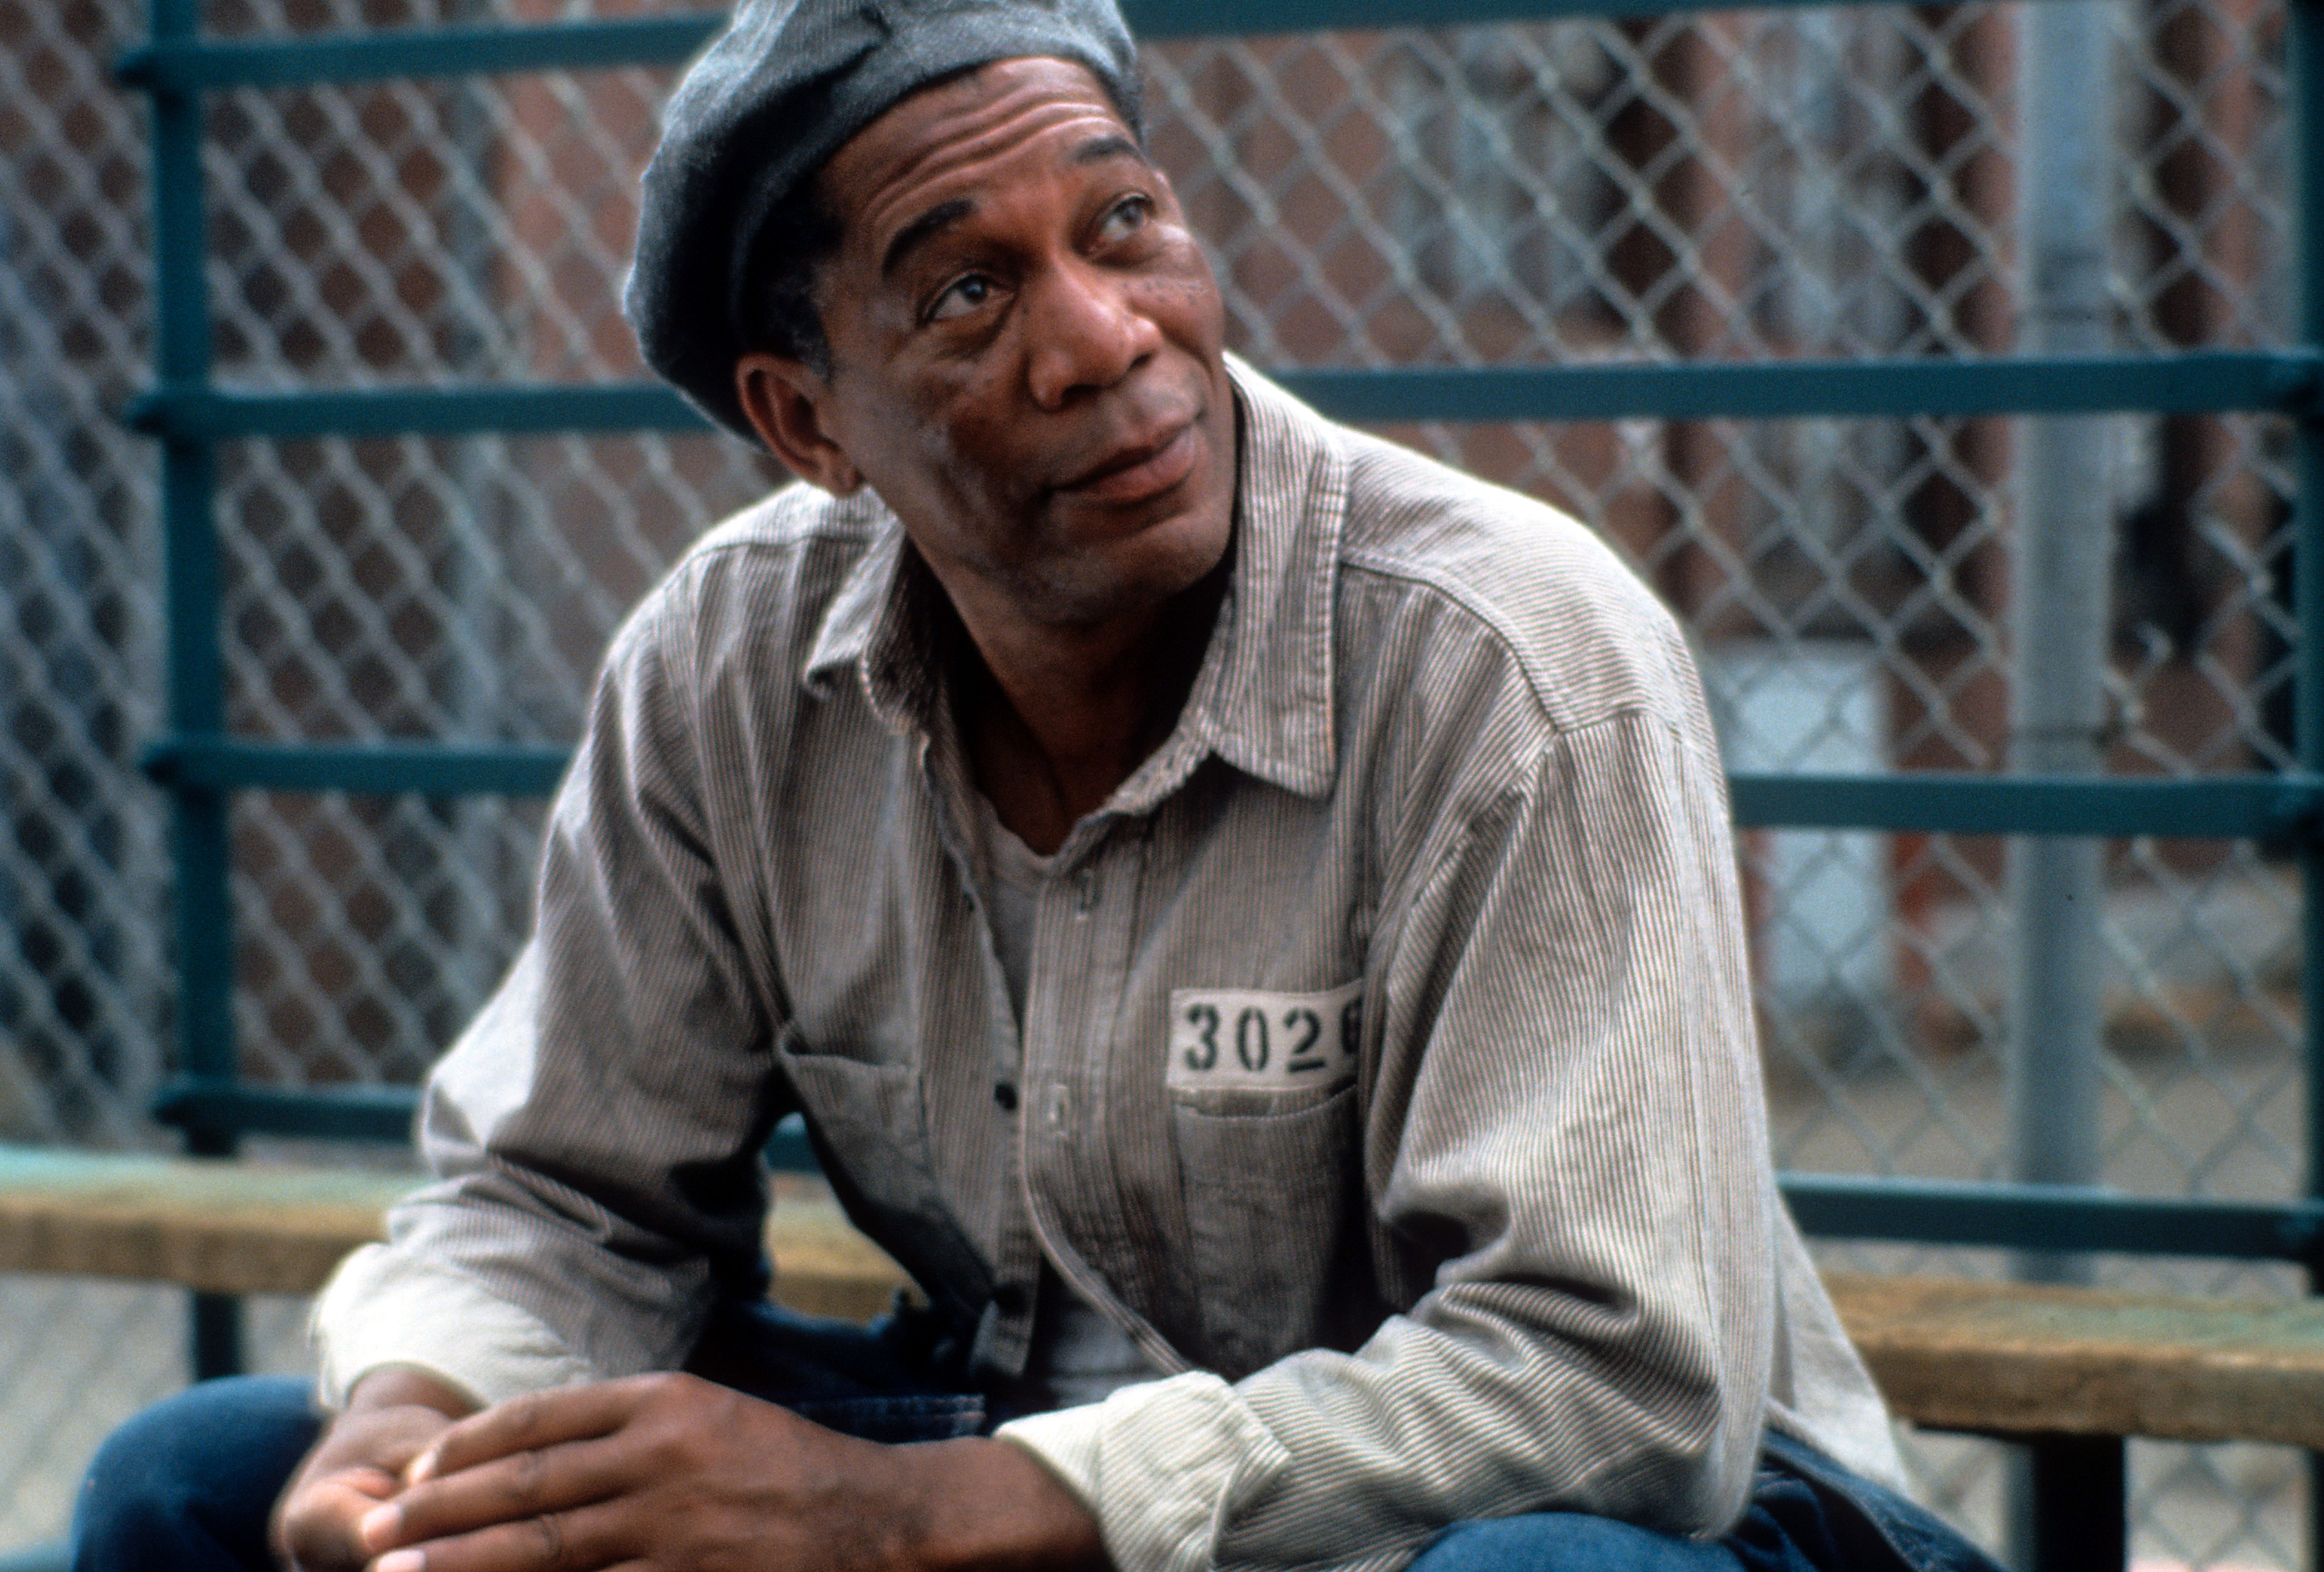 Morgan Freeman in "The Shawshank Redemption" in 1994 | Source: Getty Images